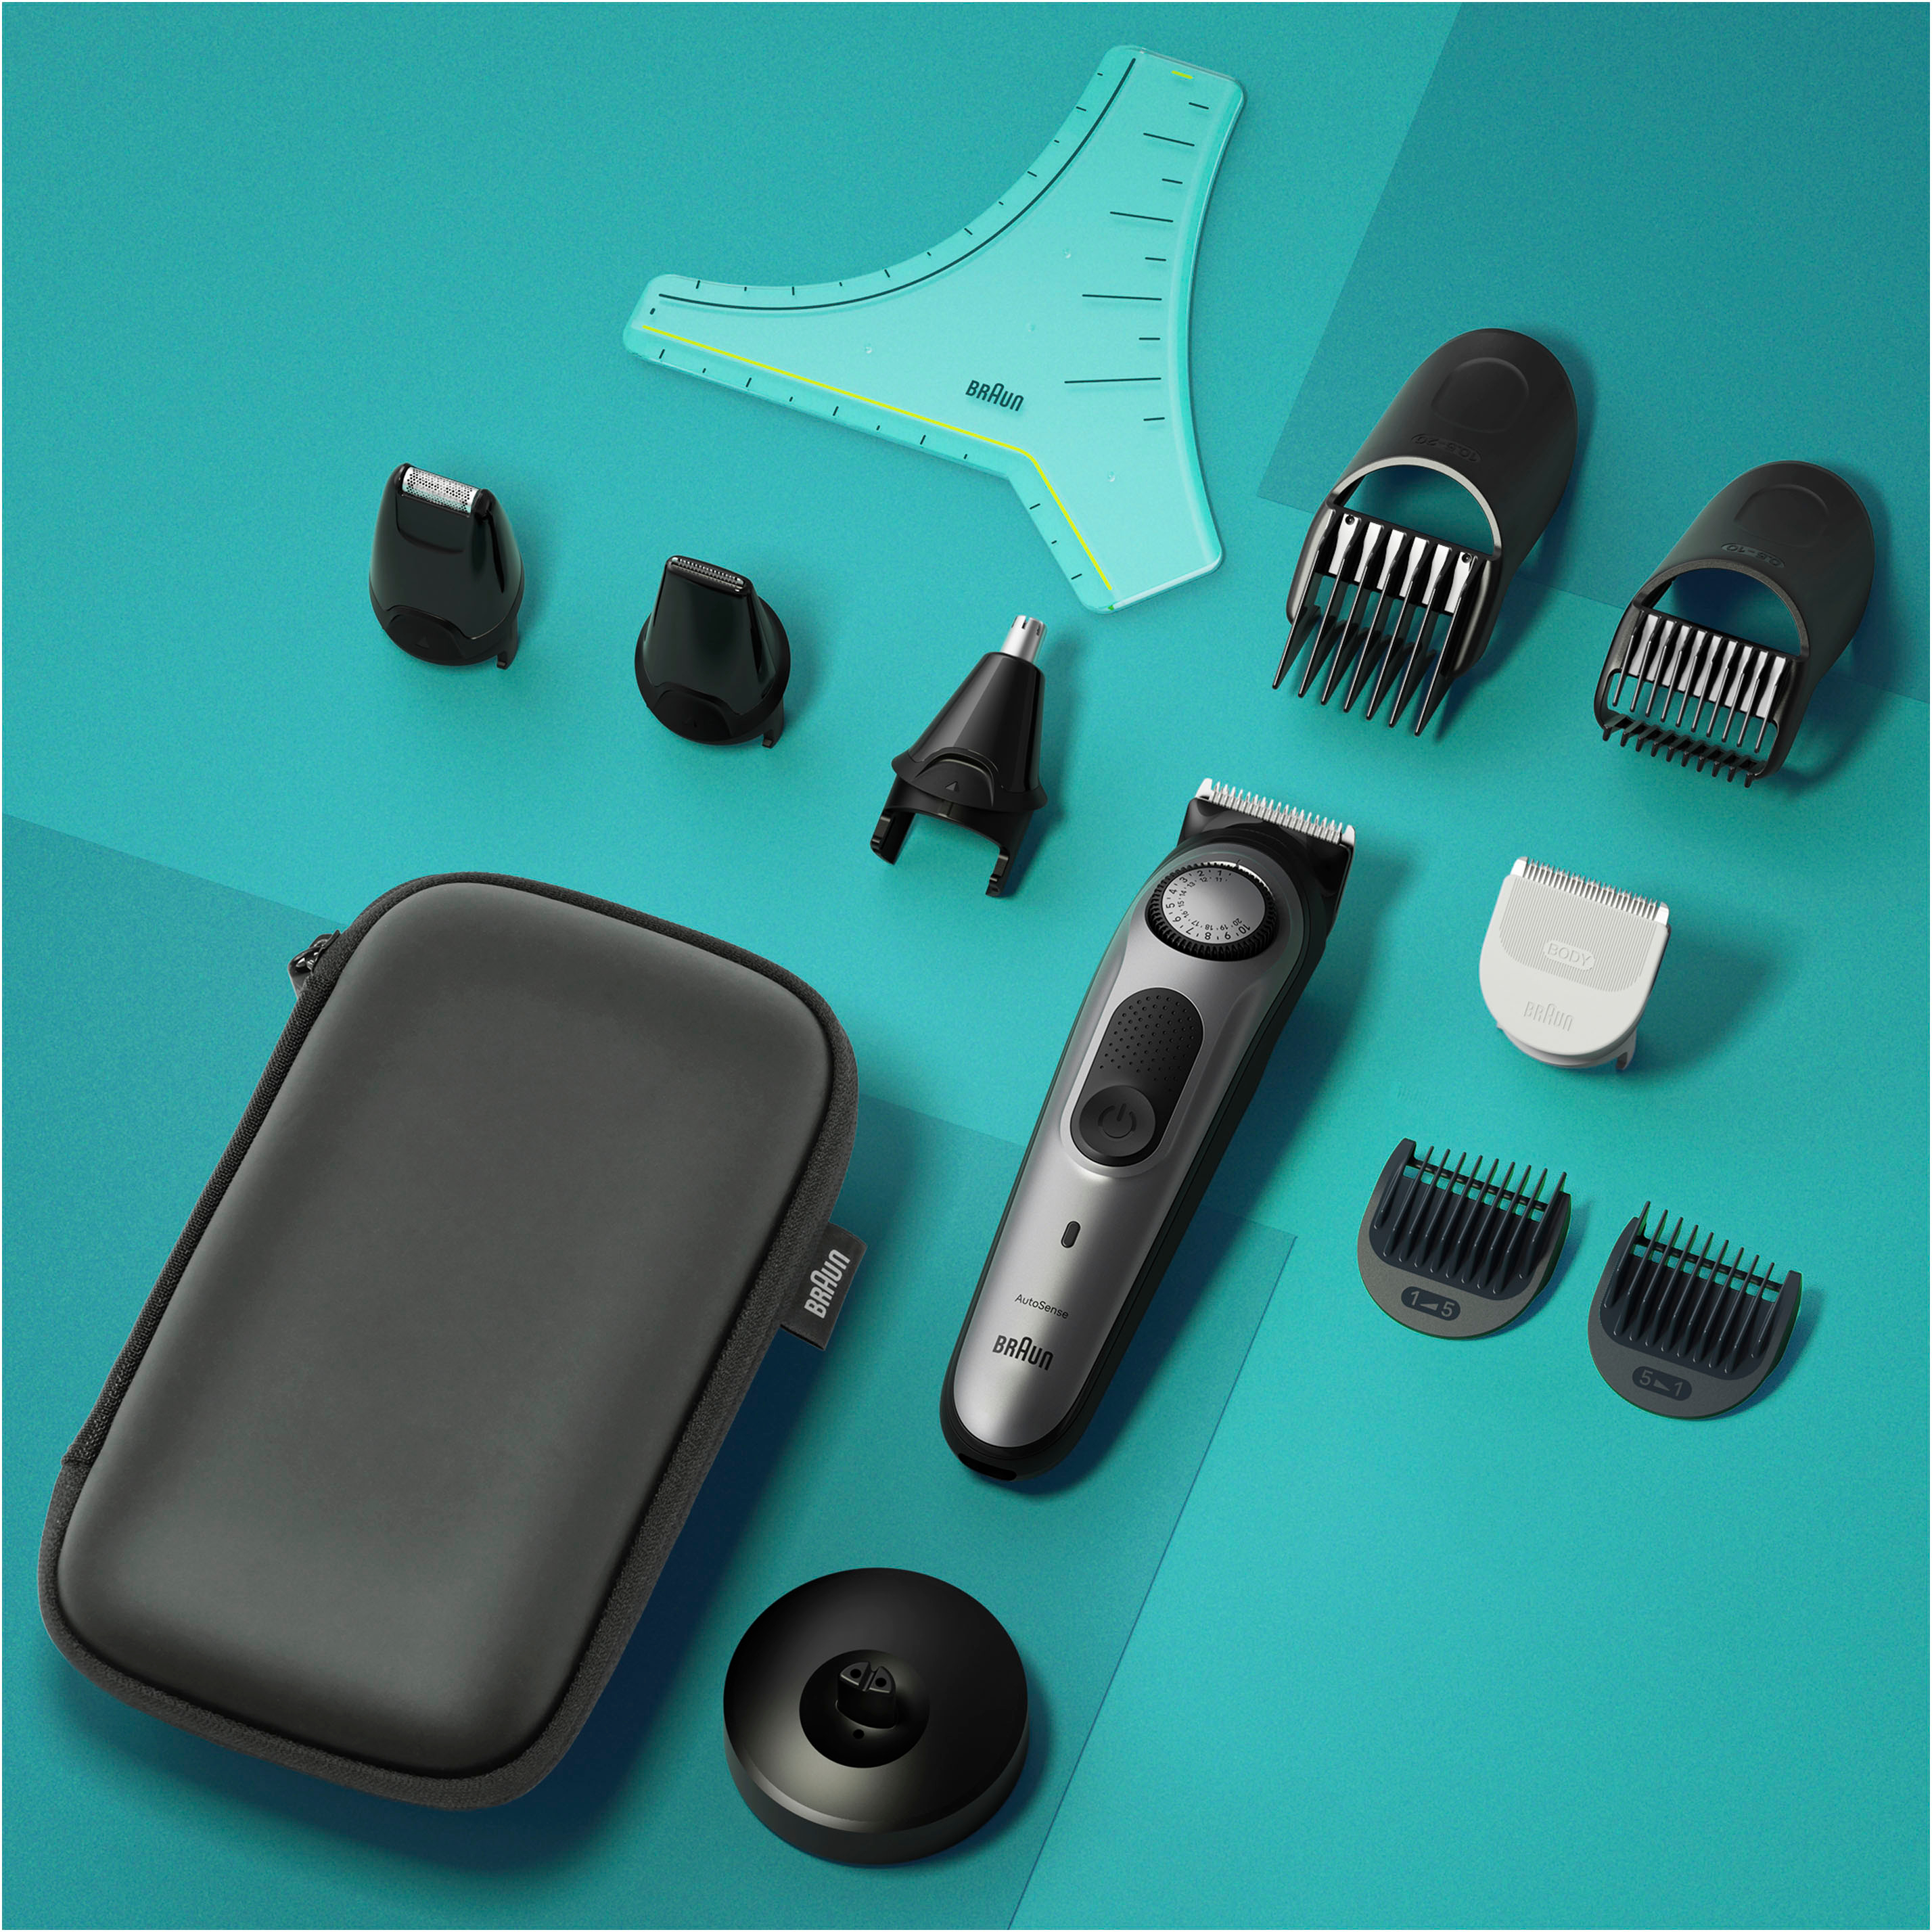 All-In-One Trimmer Best More Kit, 7420 7 11-in-1 Braun Grooming & Buy - Kit Silver with Style Series AiO7420 Beard